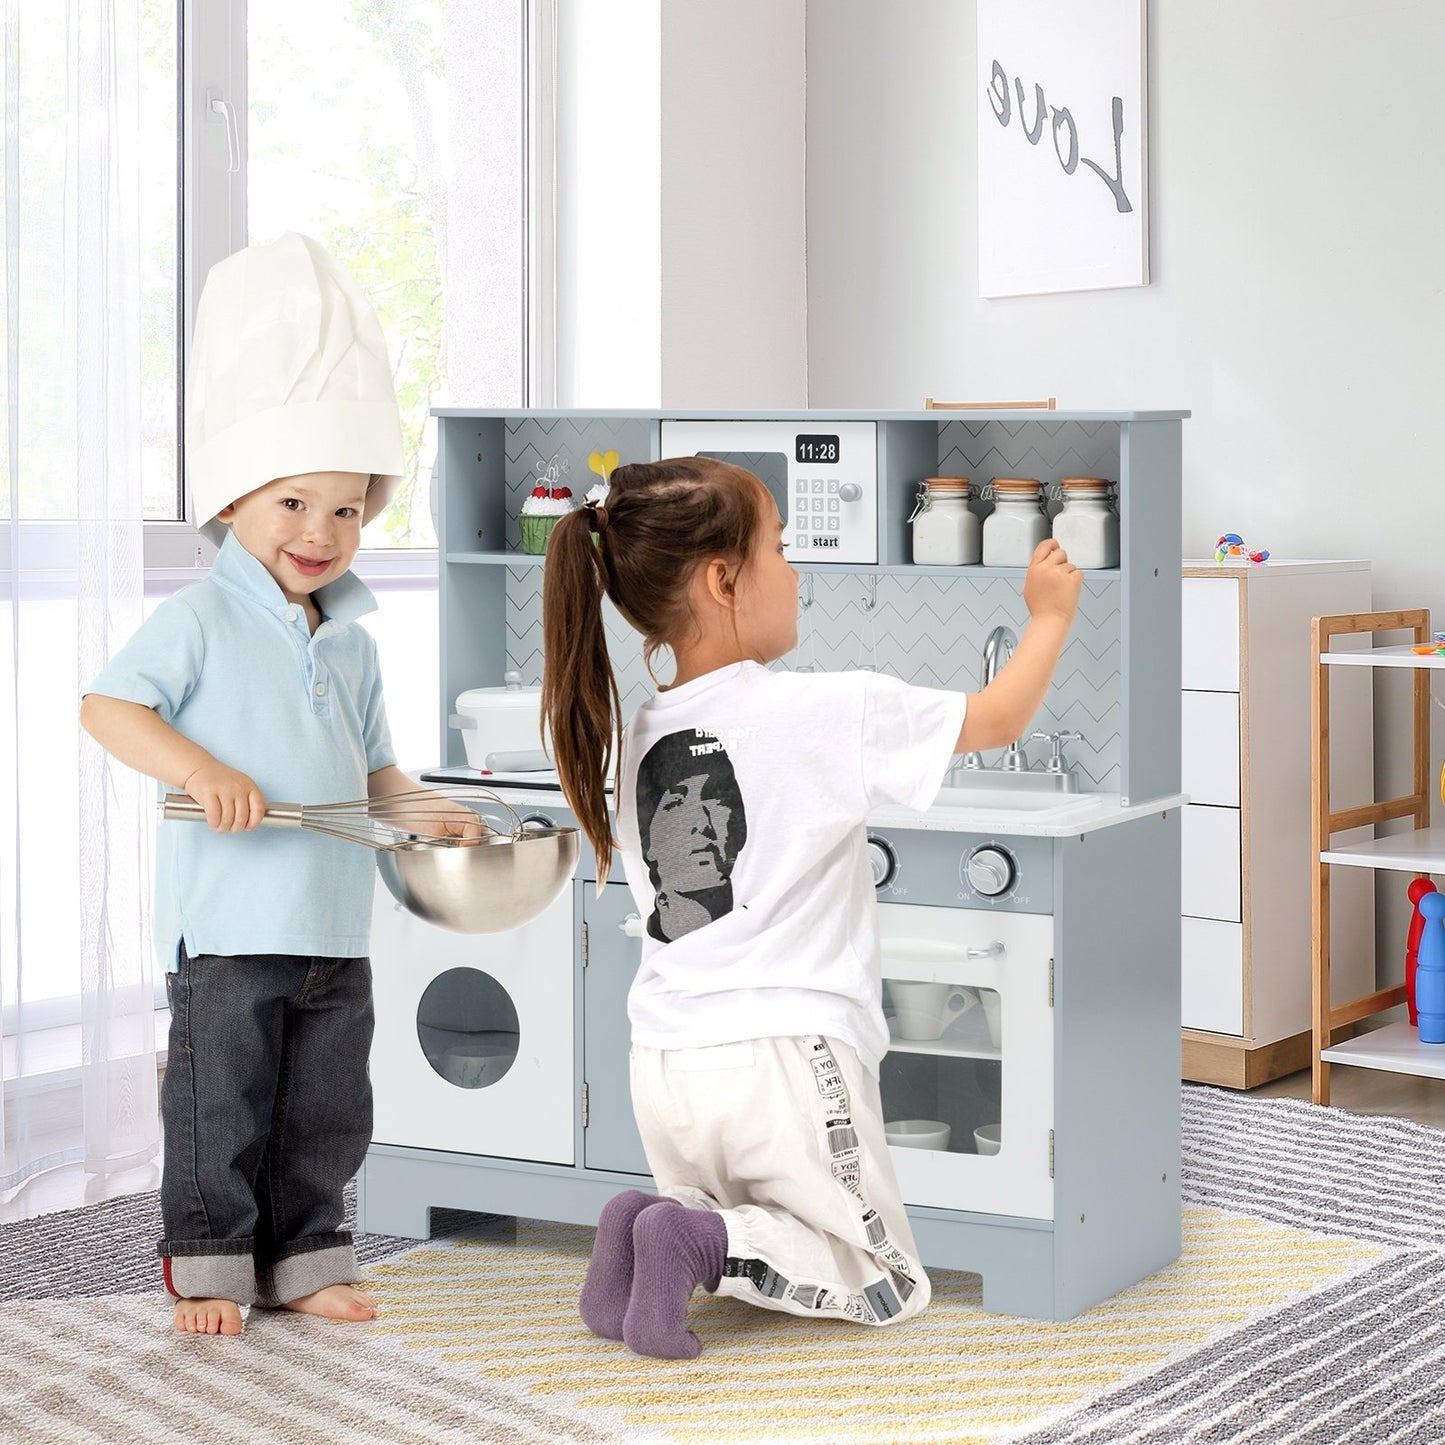 Pretend Play Kitchen Wooden Toy Set for Kids with Realistic Light and Sound, Gray & White at Gallery Canada